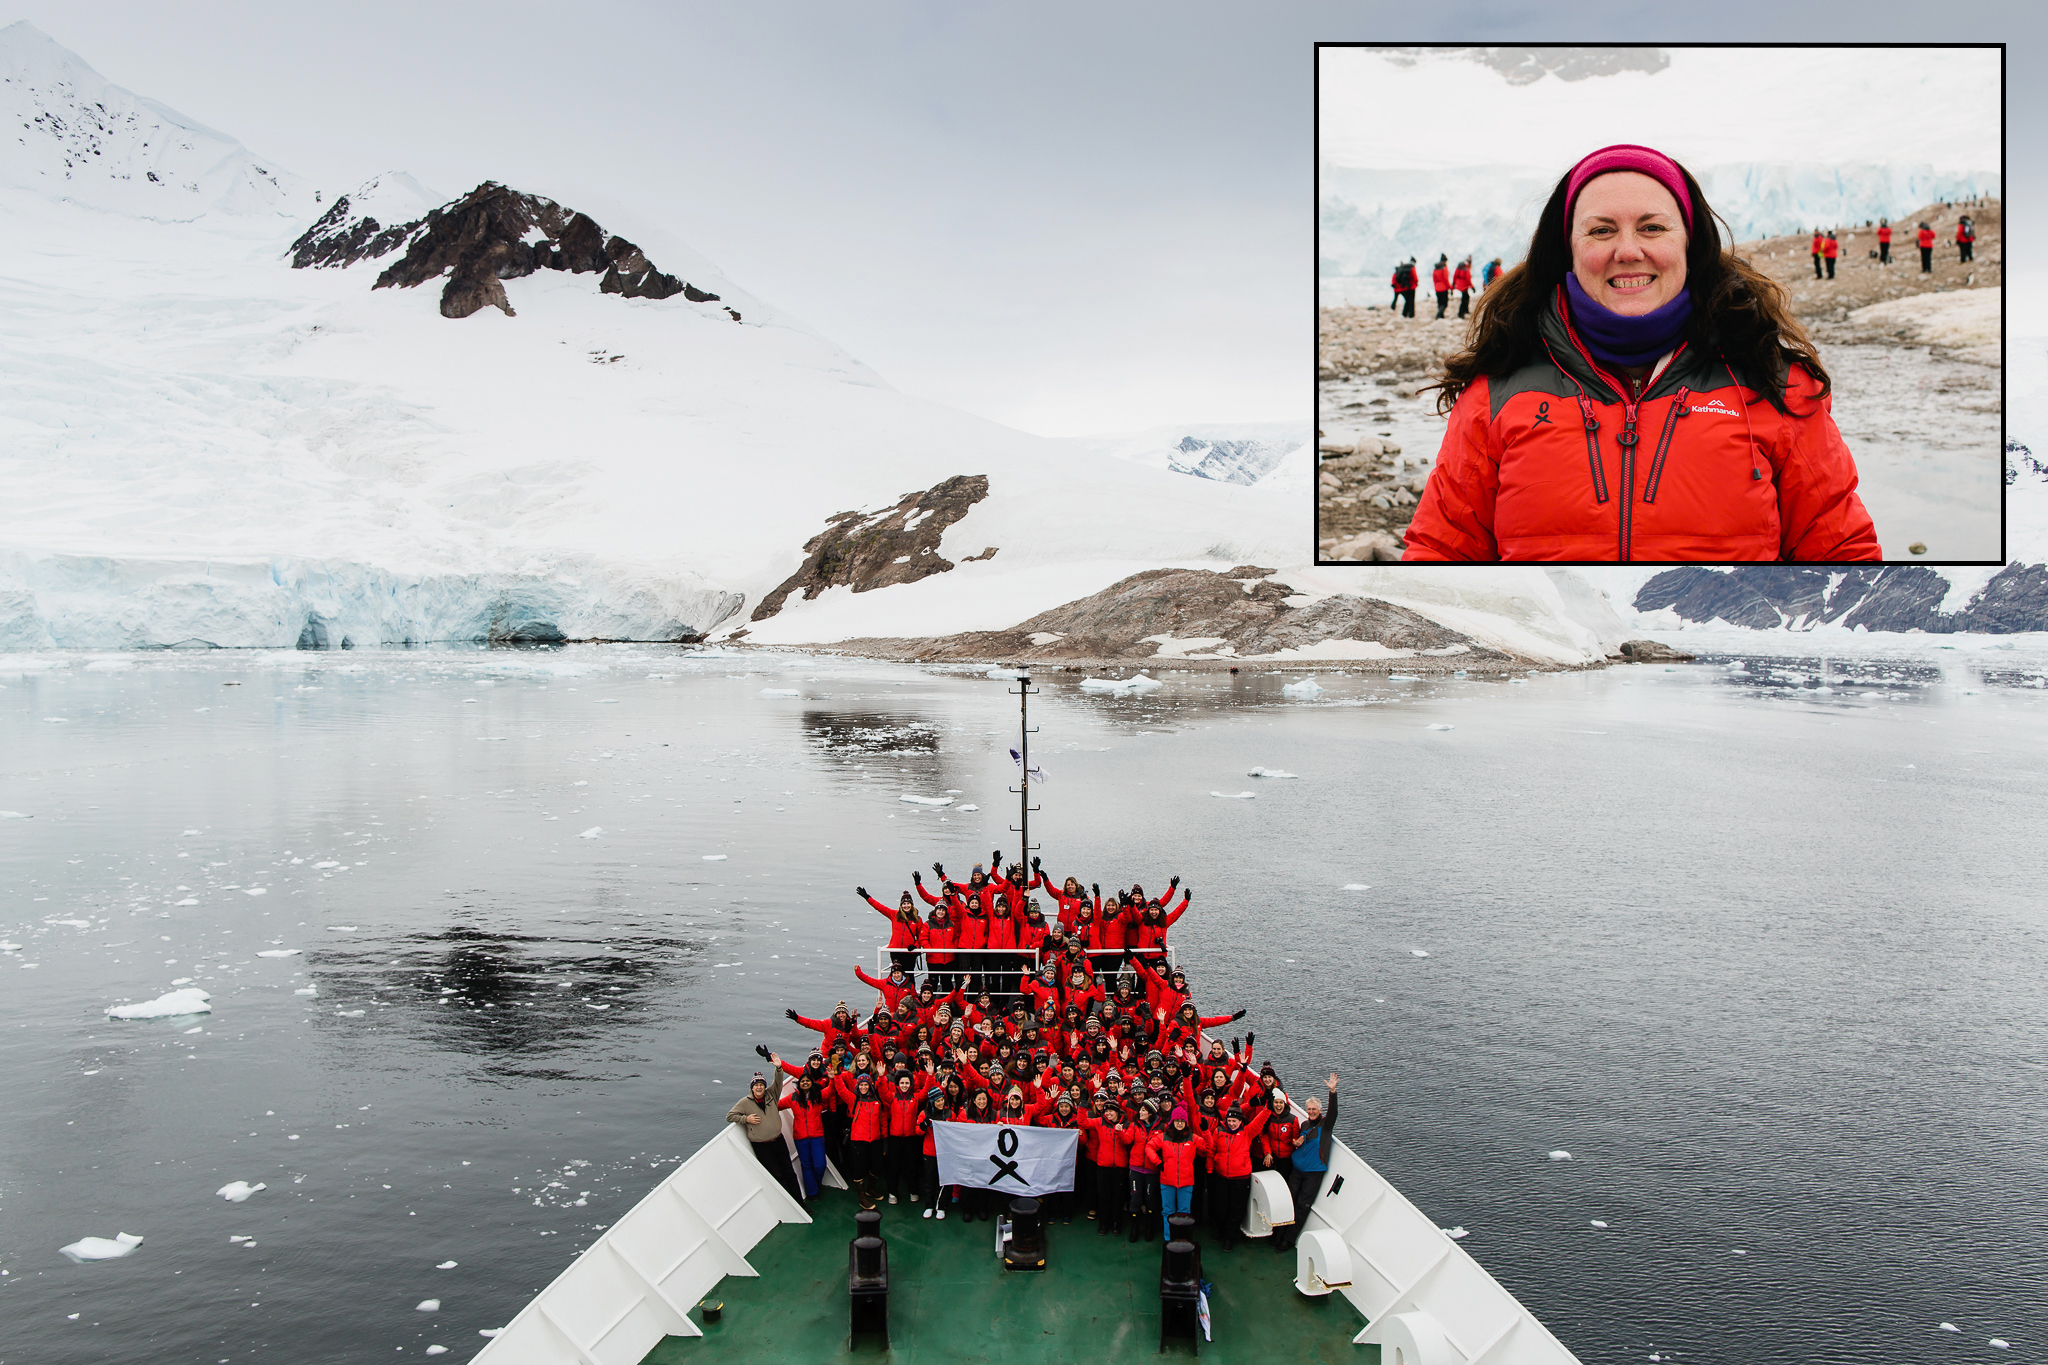 Women in STEMM leadership: lessons from Antarctica